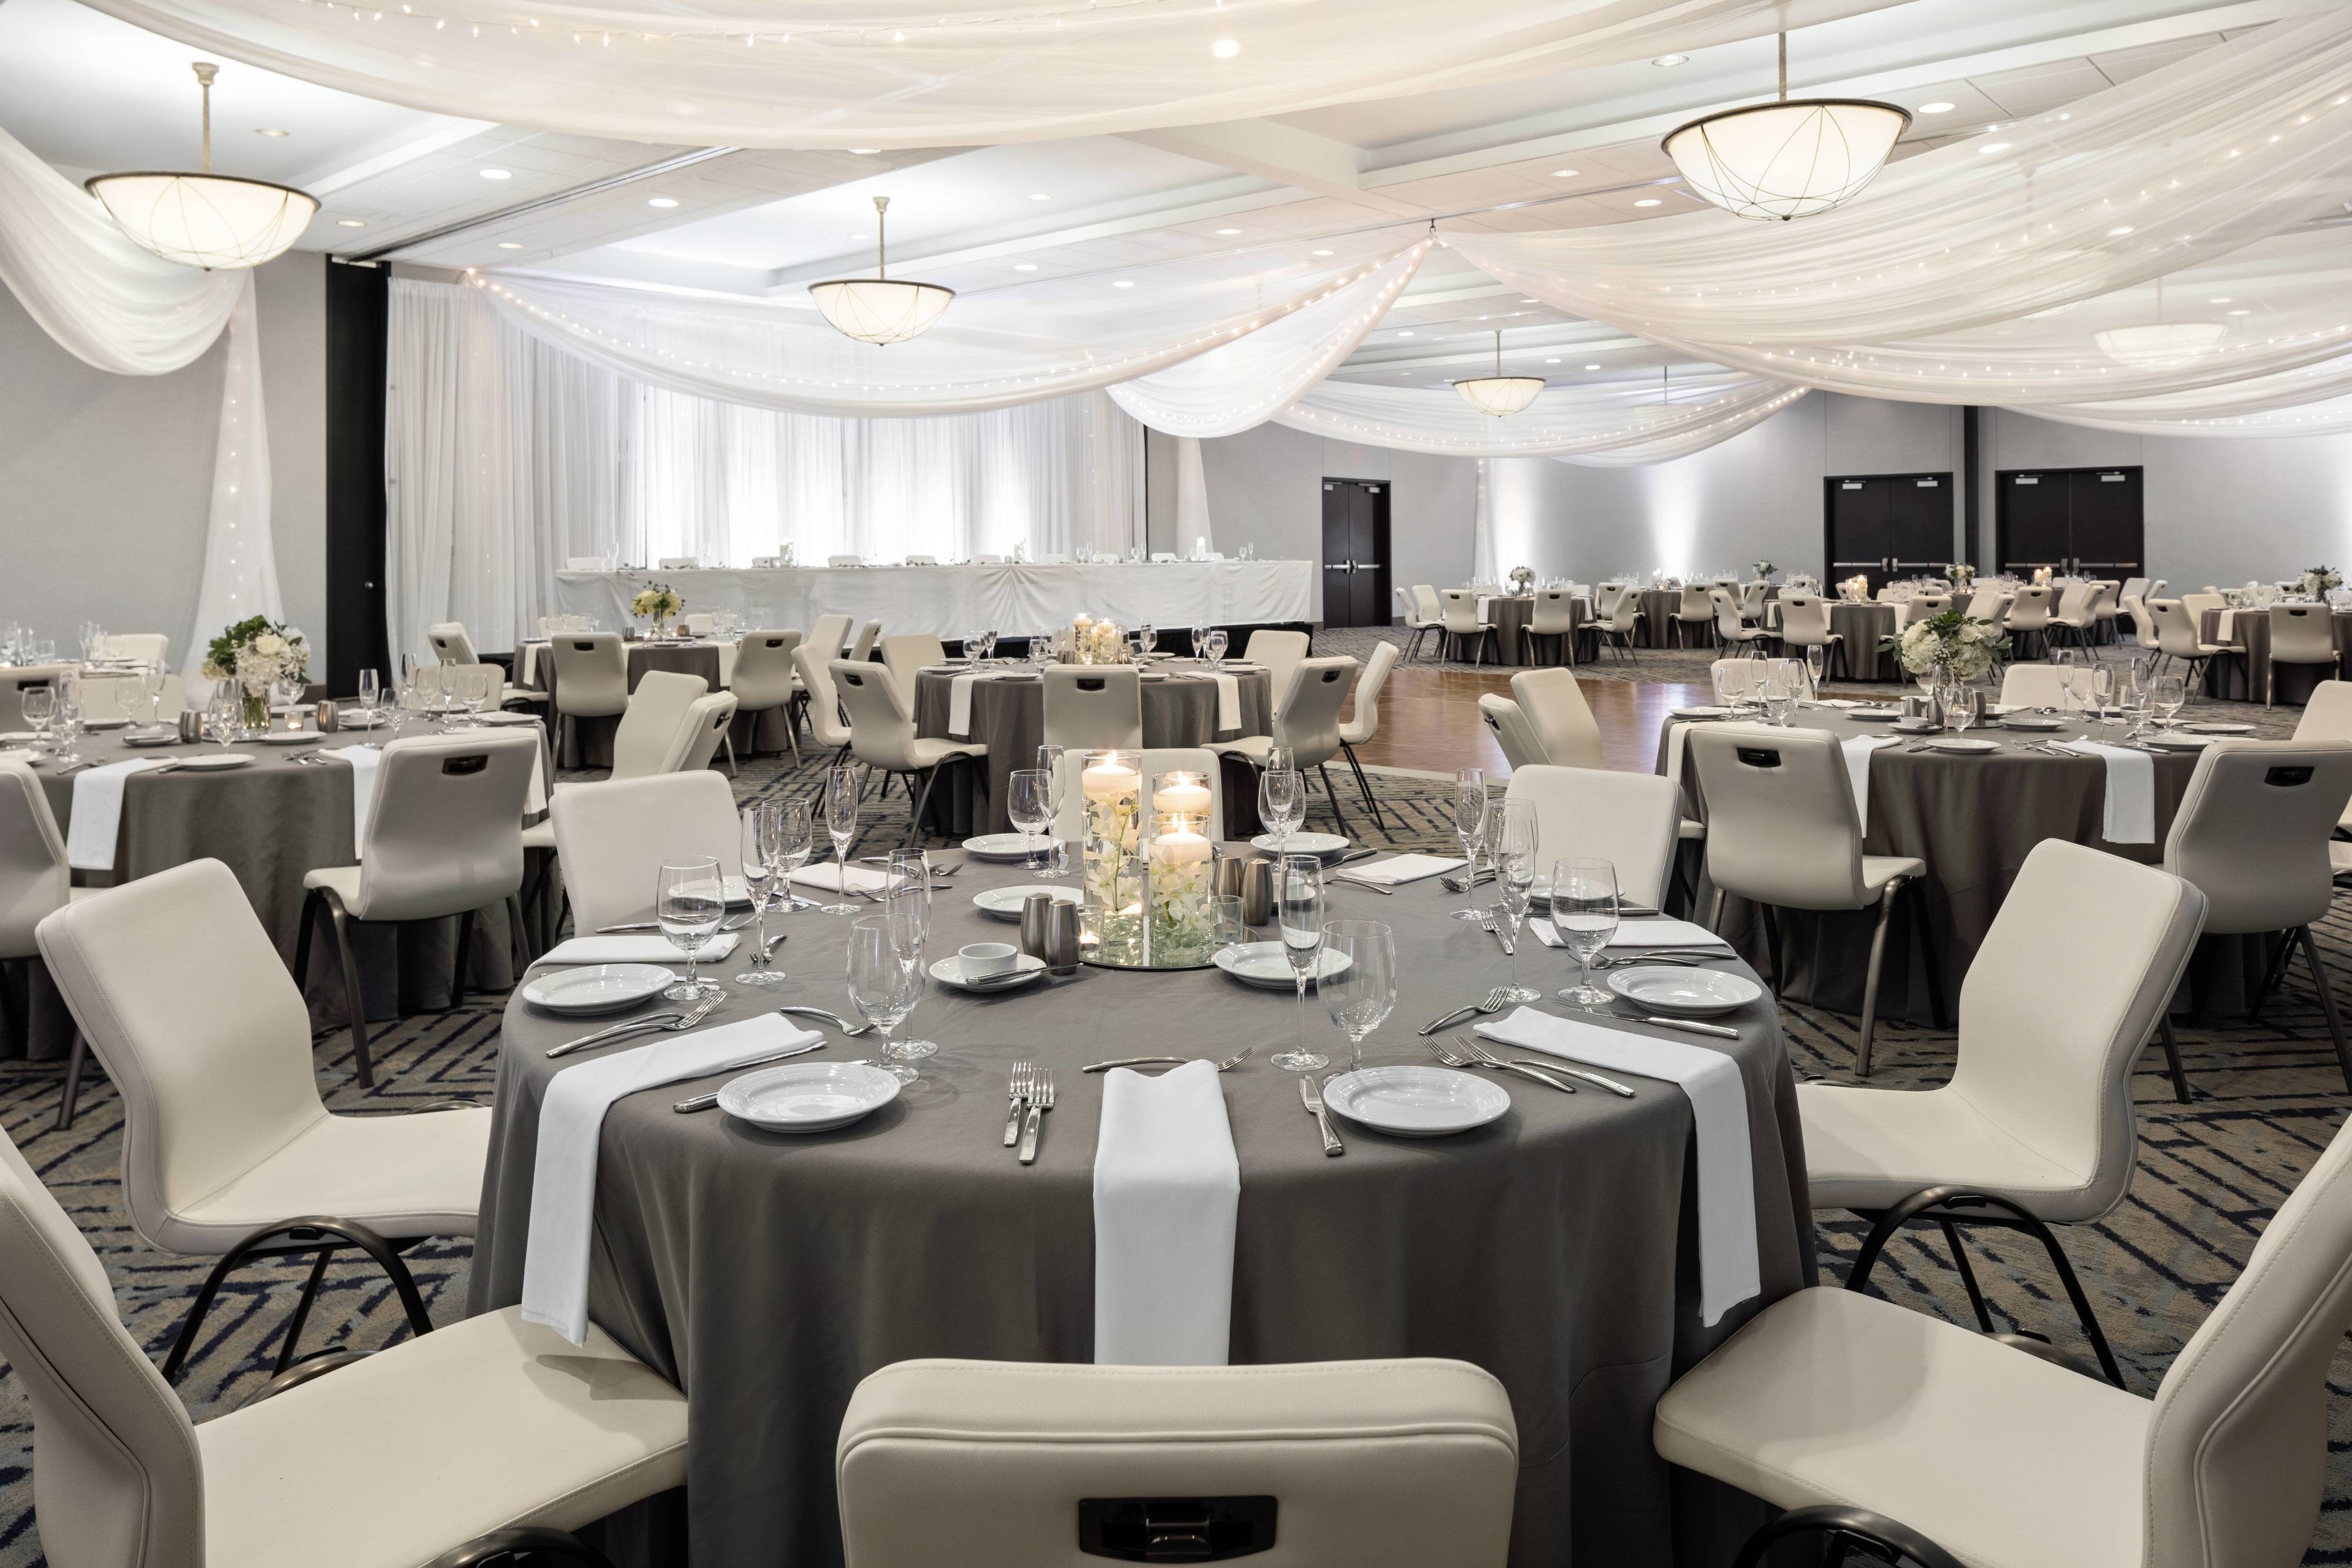 Ballroom with soft white lighting and reception tables